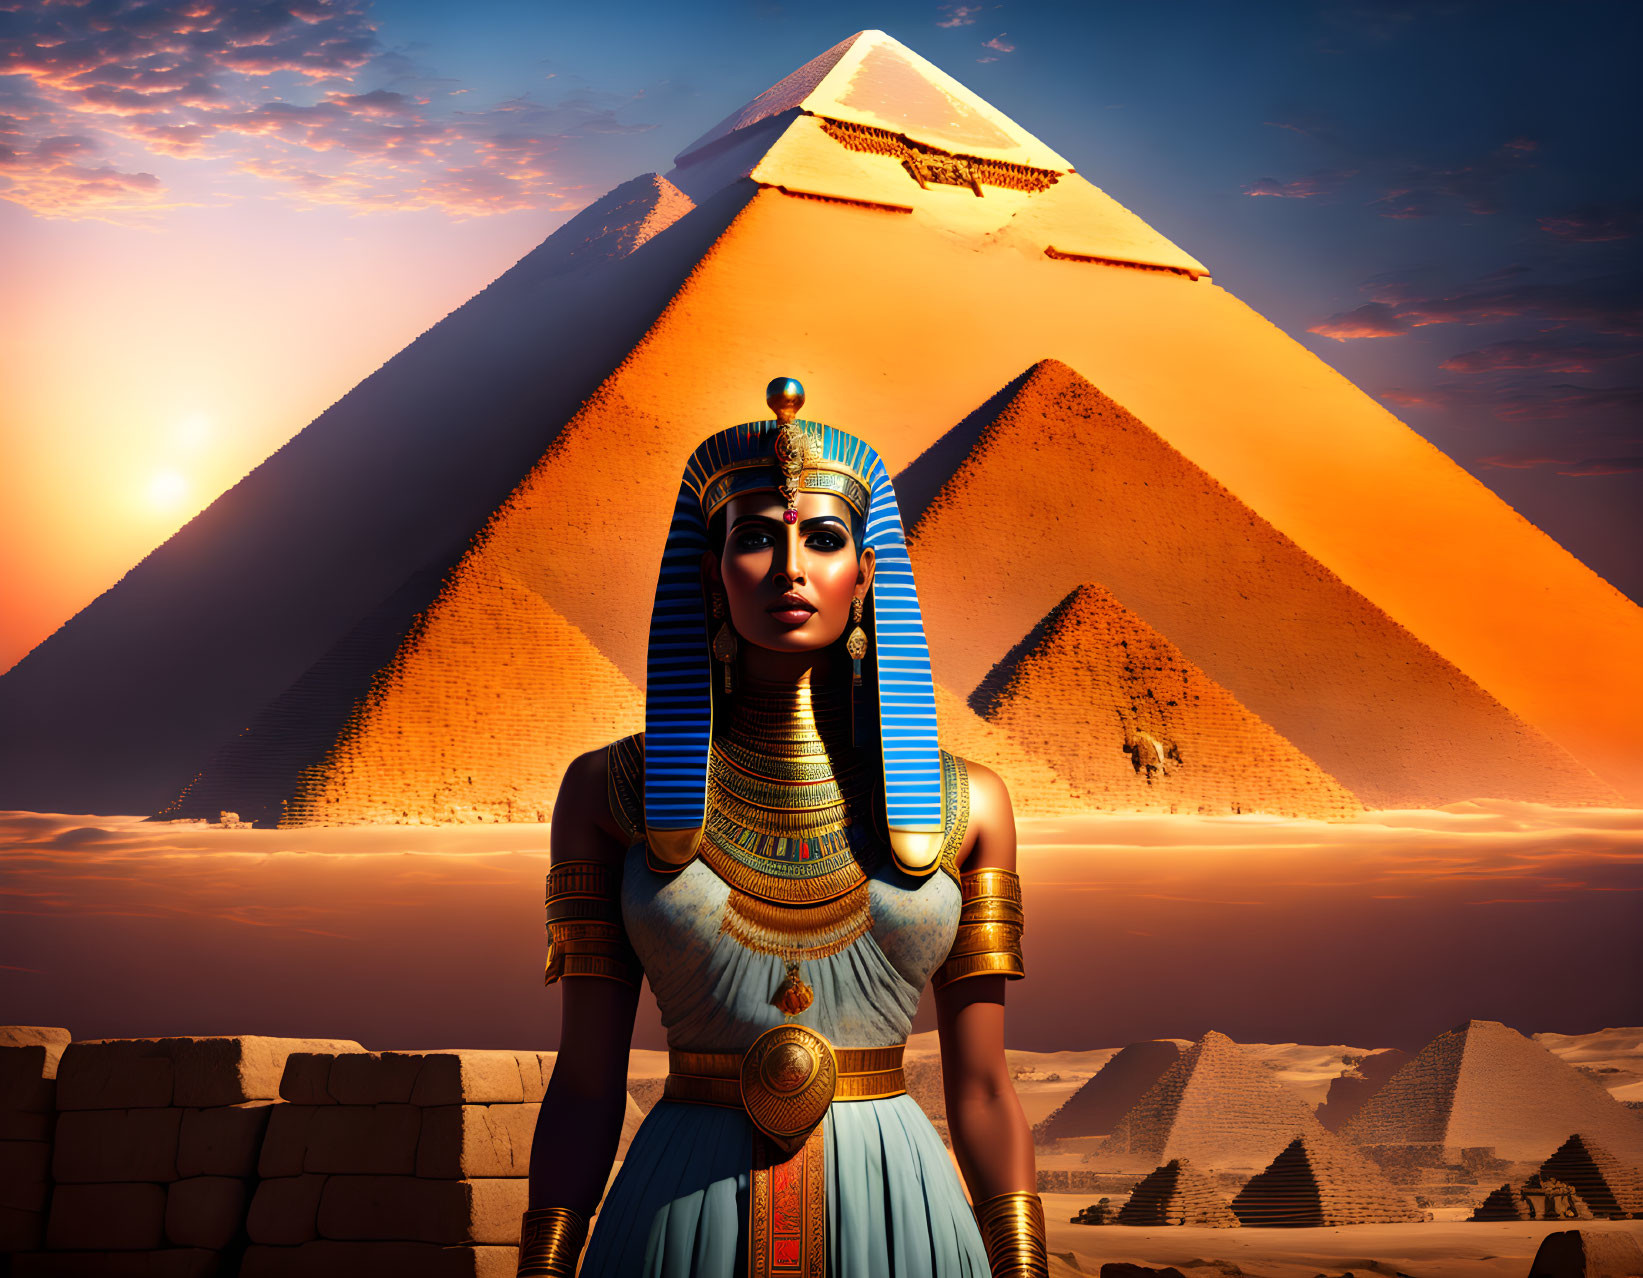 Digital artwork: Egyptian queen with headdress by Pyramids of Giza at sunset